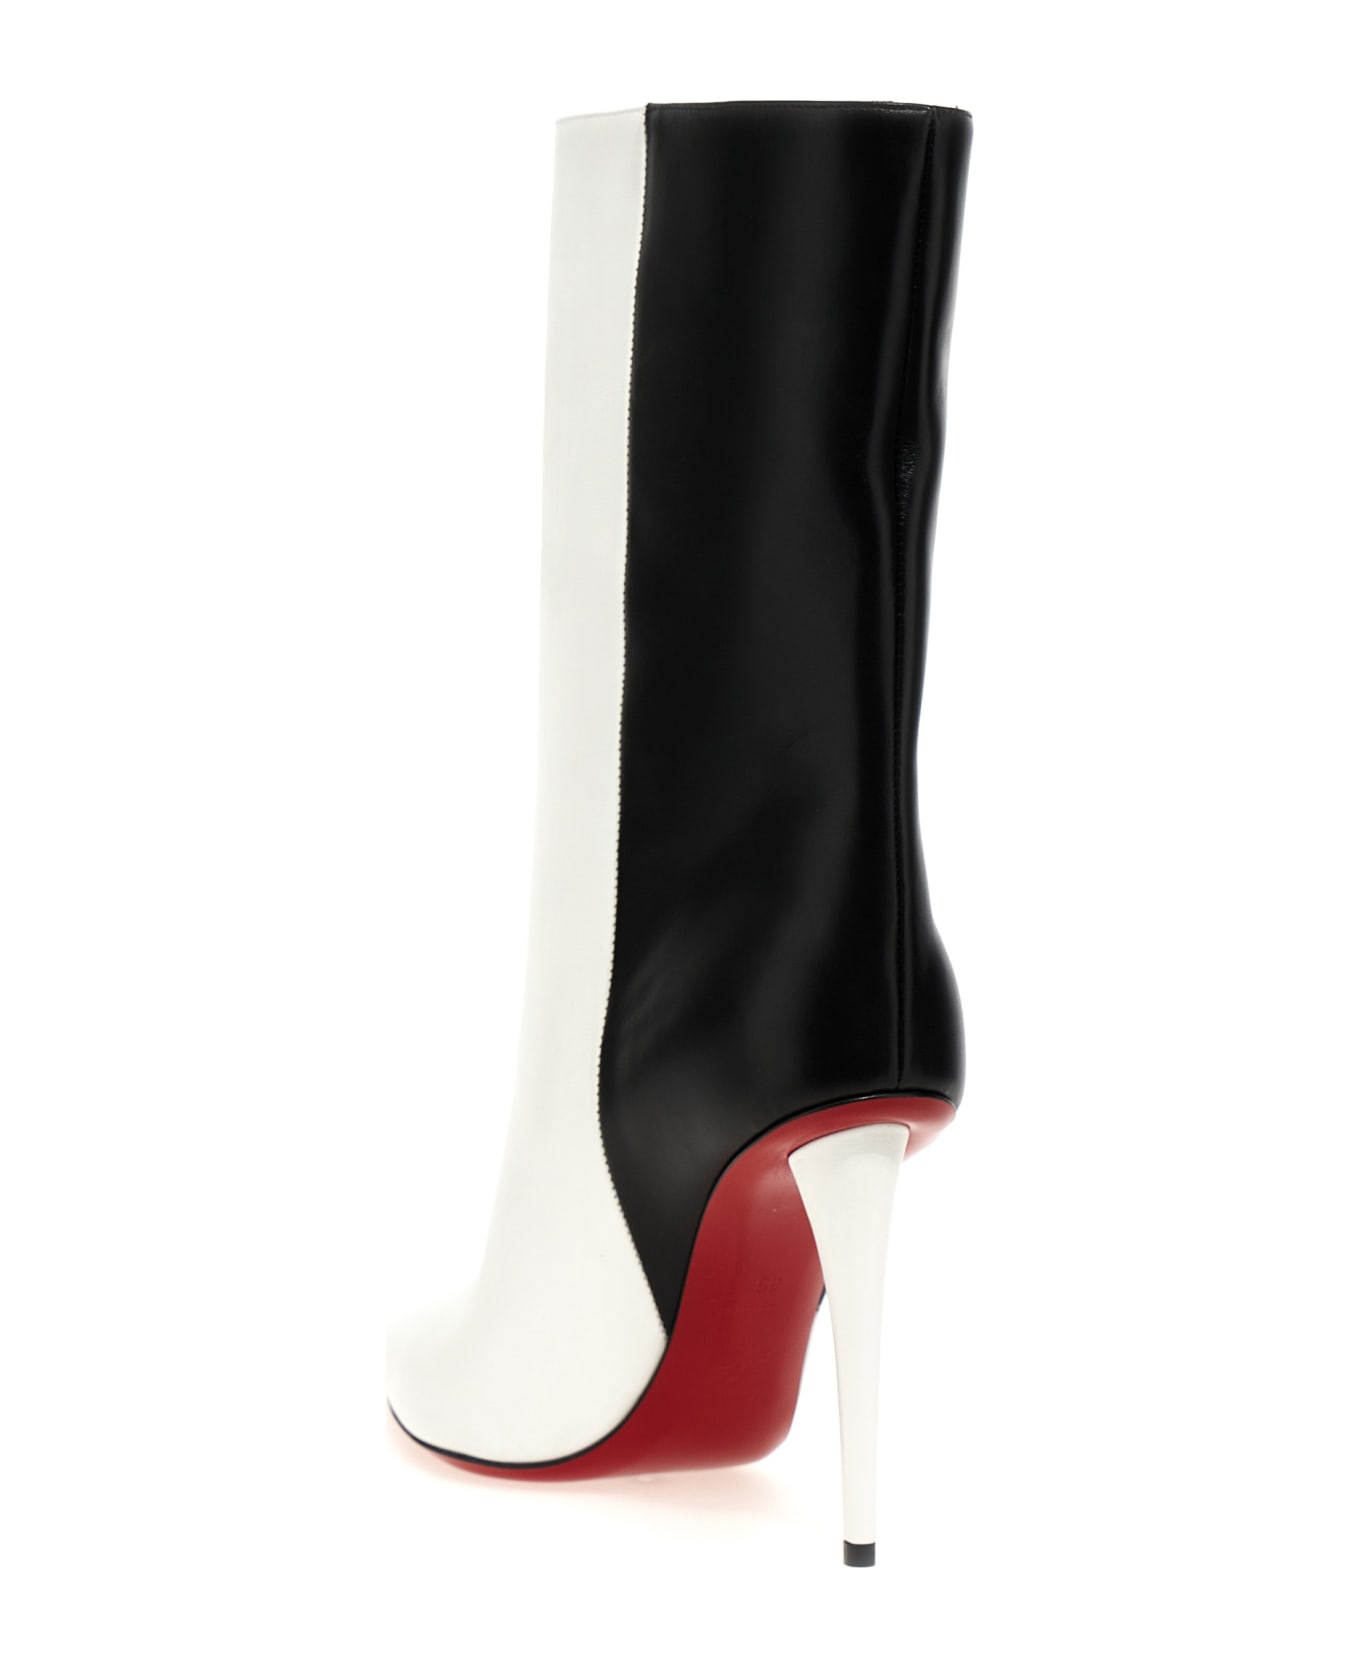 Christian Louboutin 'astrilarge' Ankle Boots - White/Black ブーツ